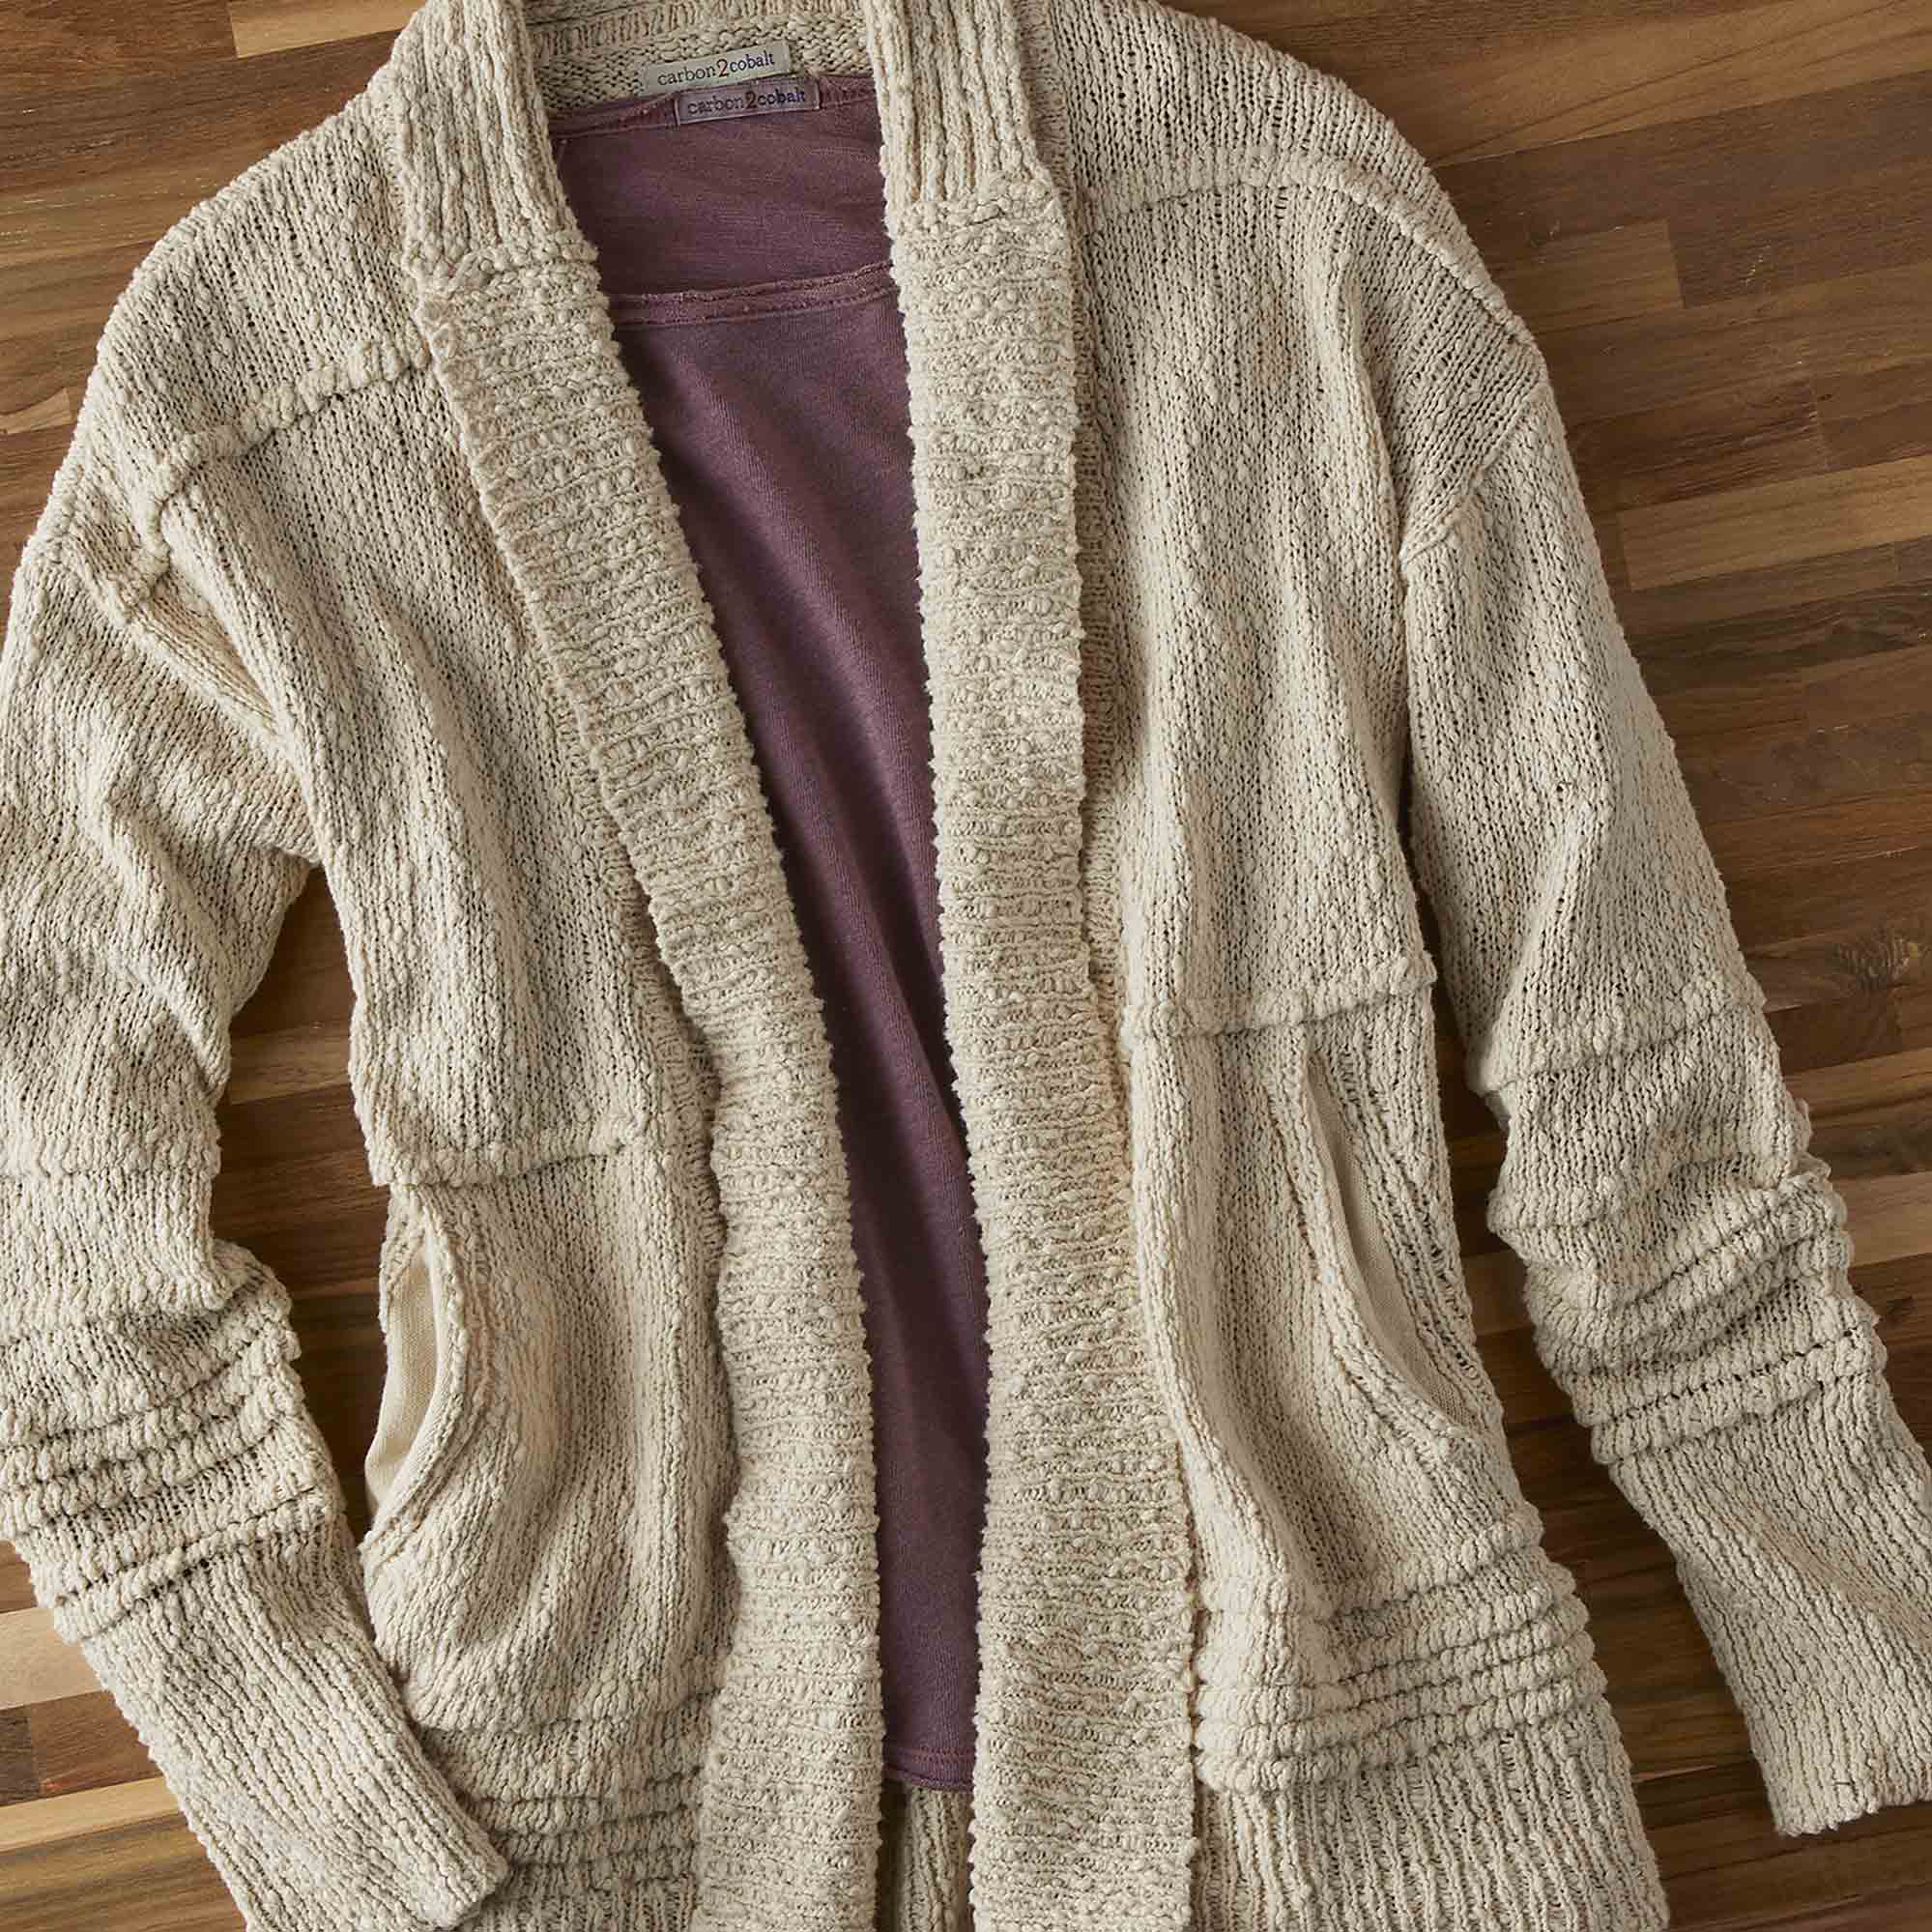 Sand Dollar Sweater - Knit for the Warm-Hearted